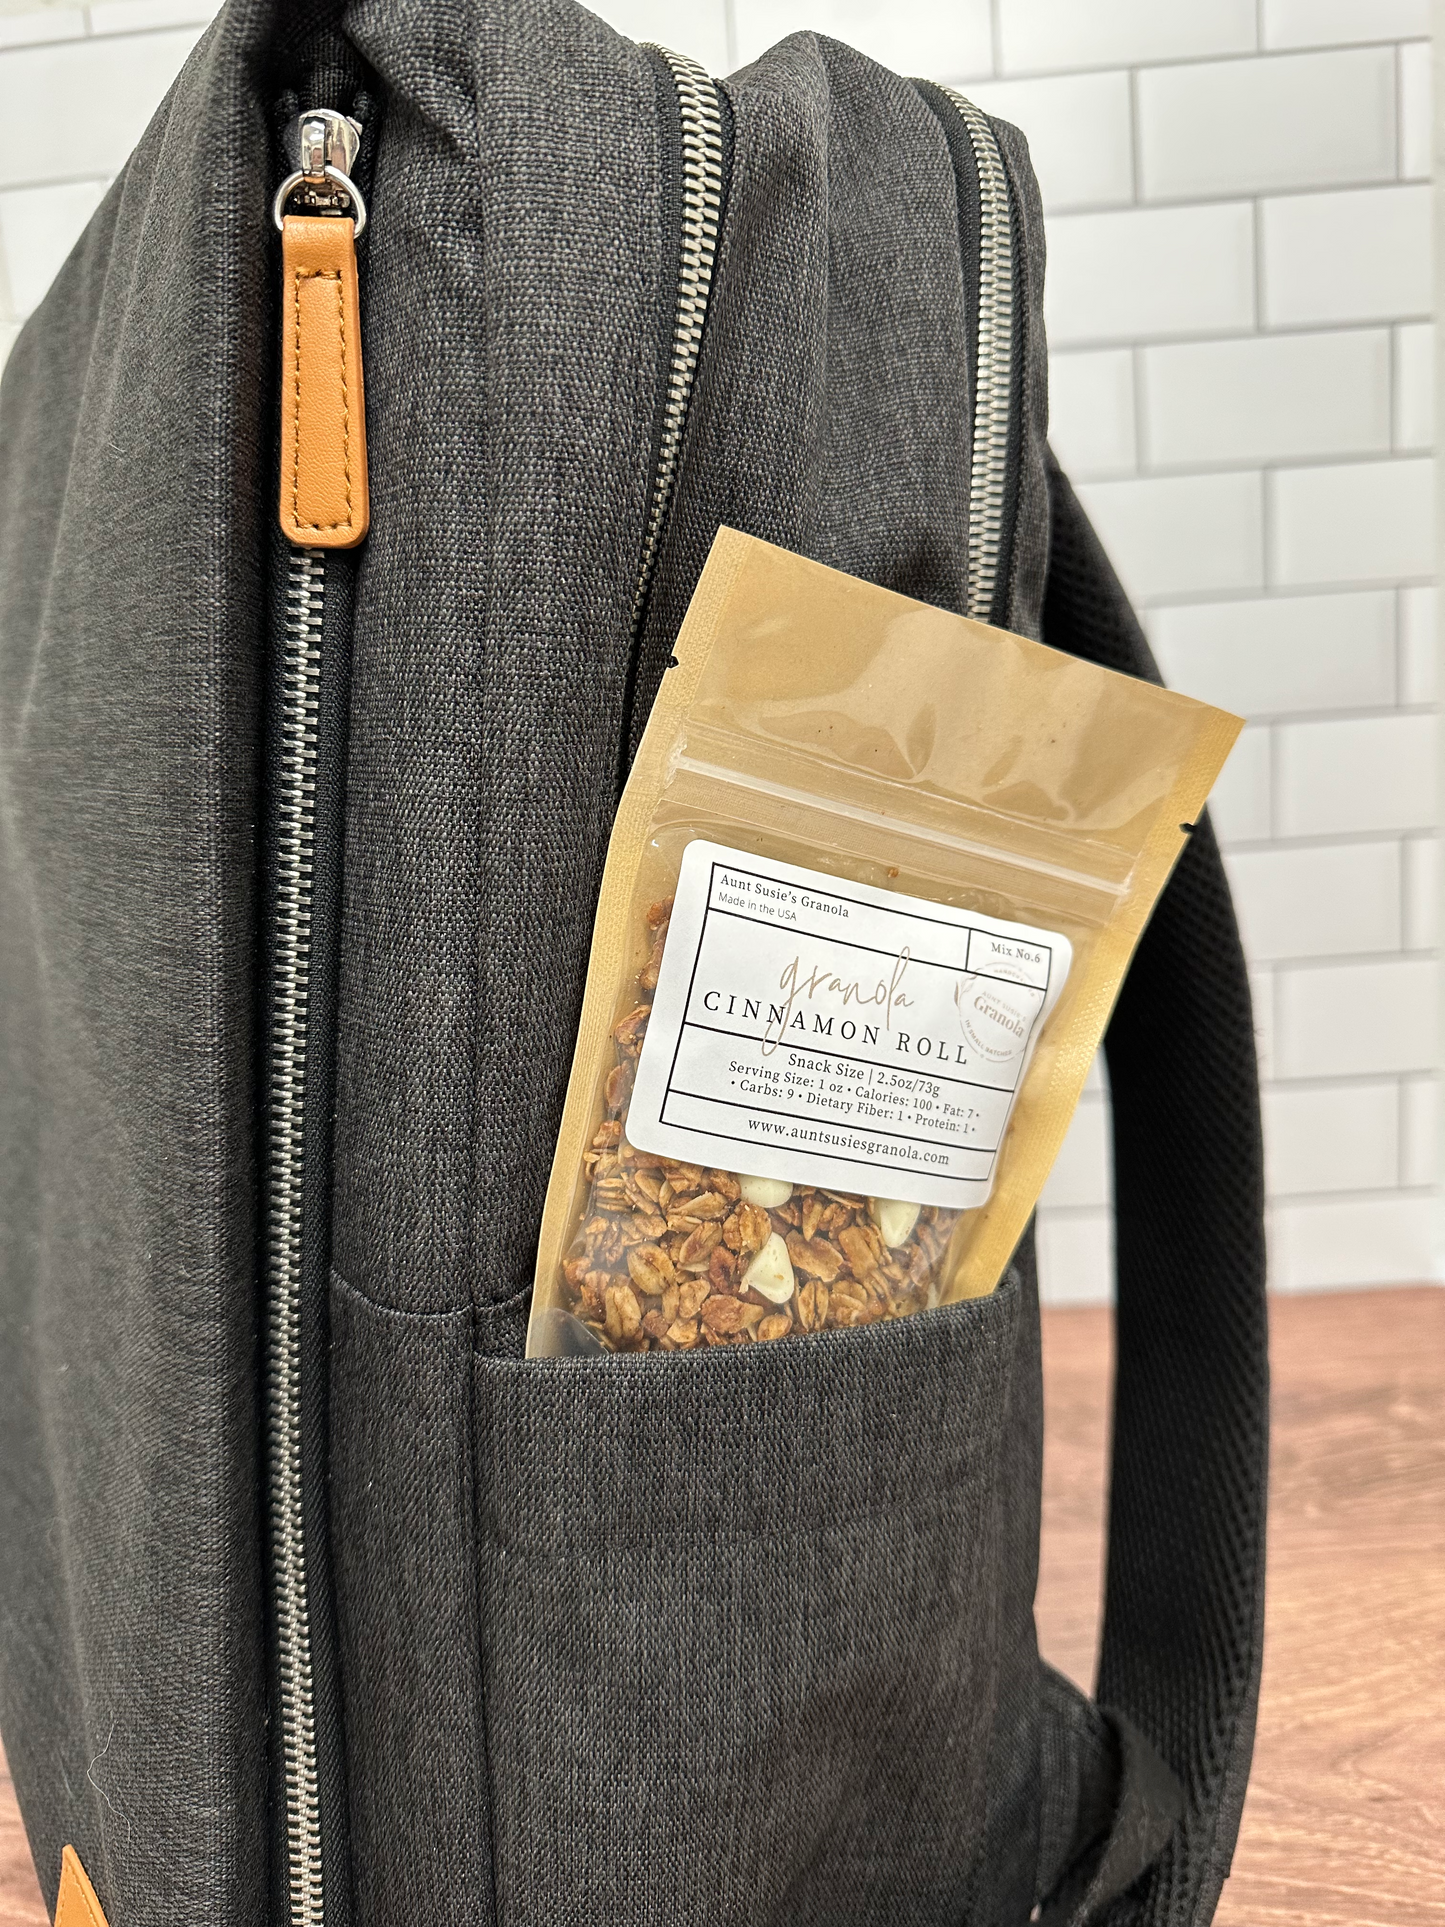 Granola Snack Bags | 2.5oz | Buy 5 or More, Save 15%